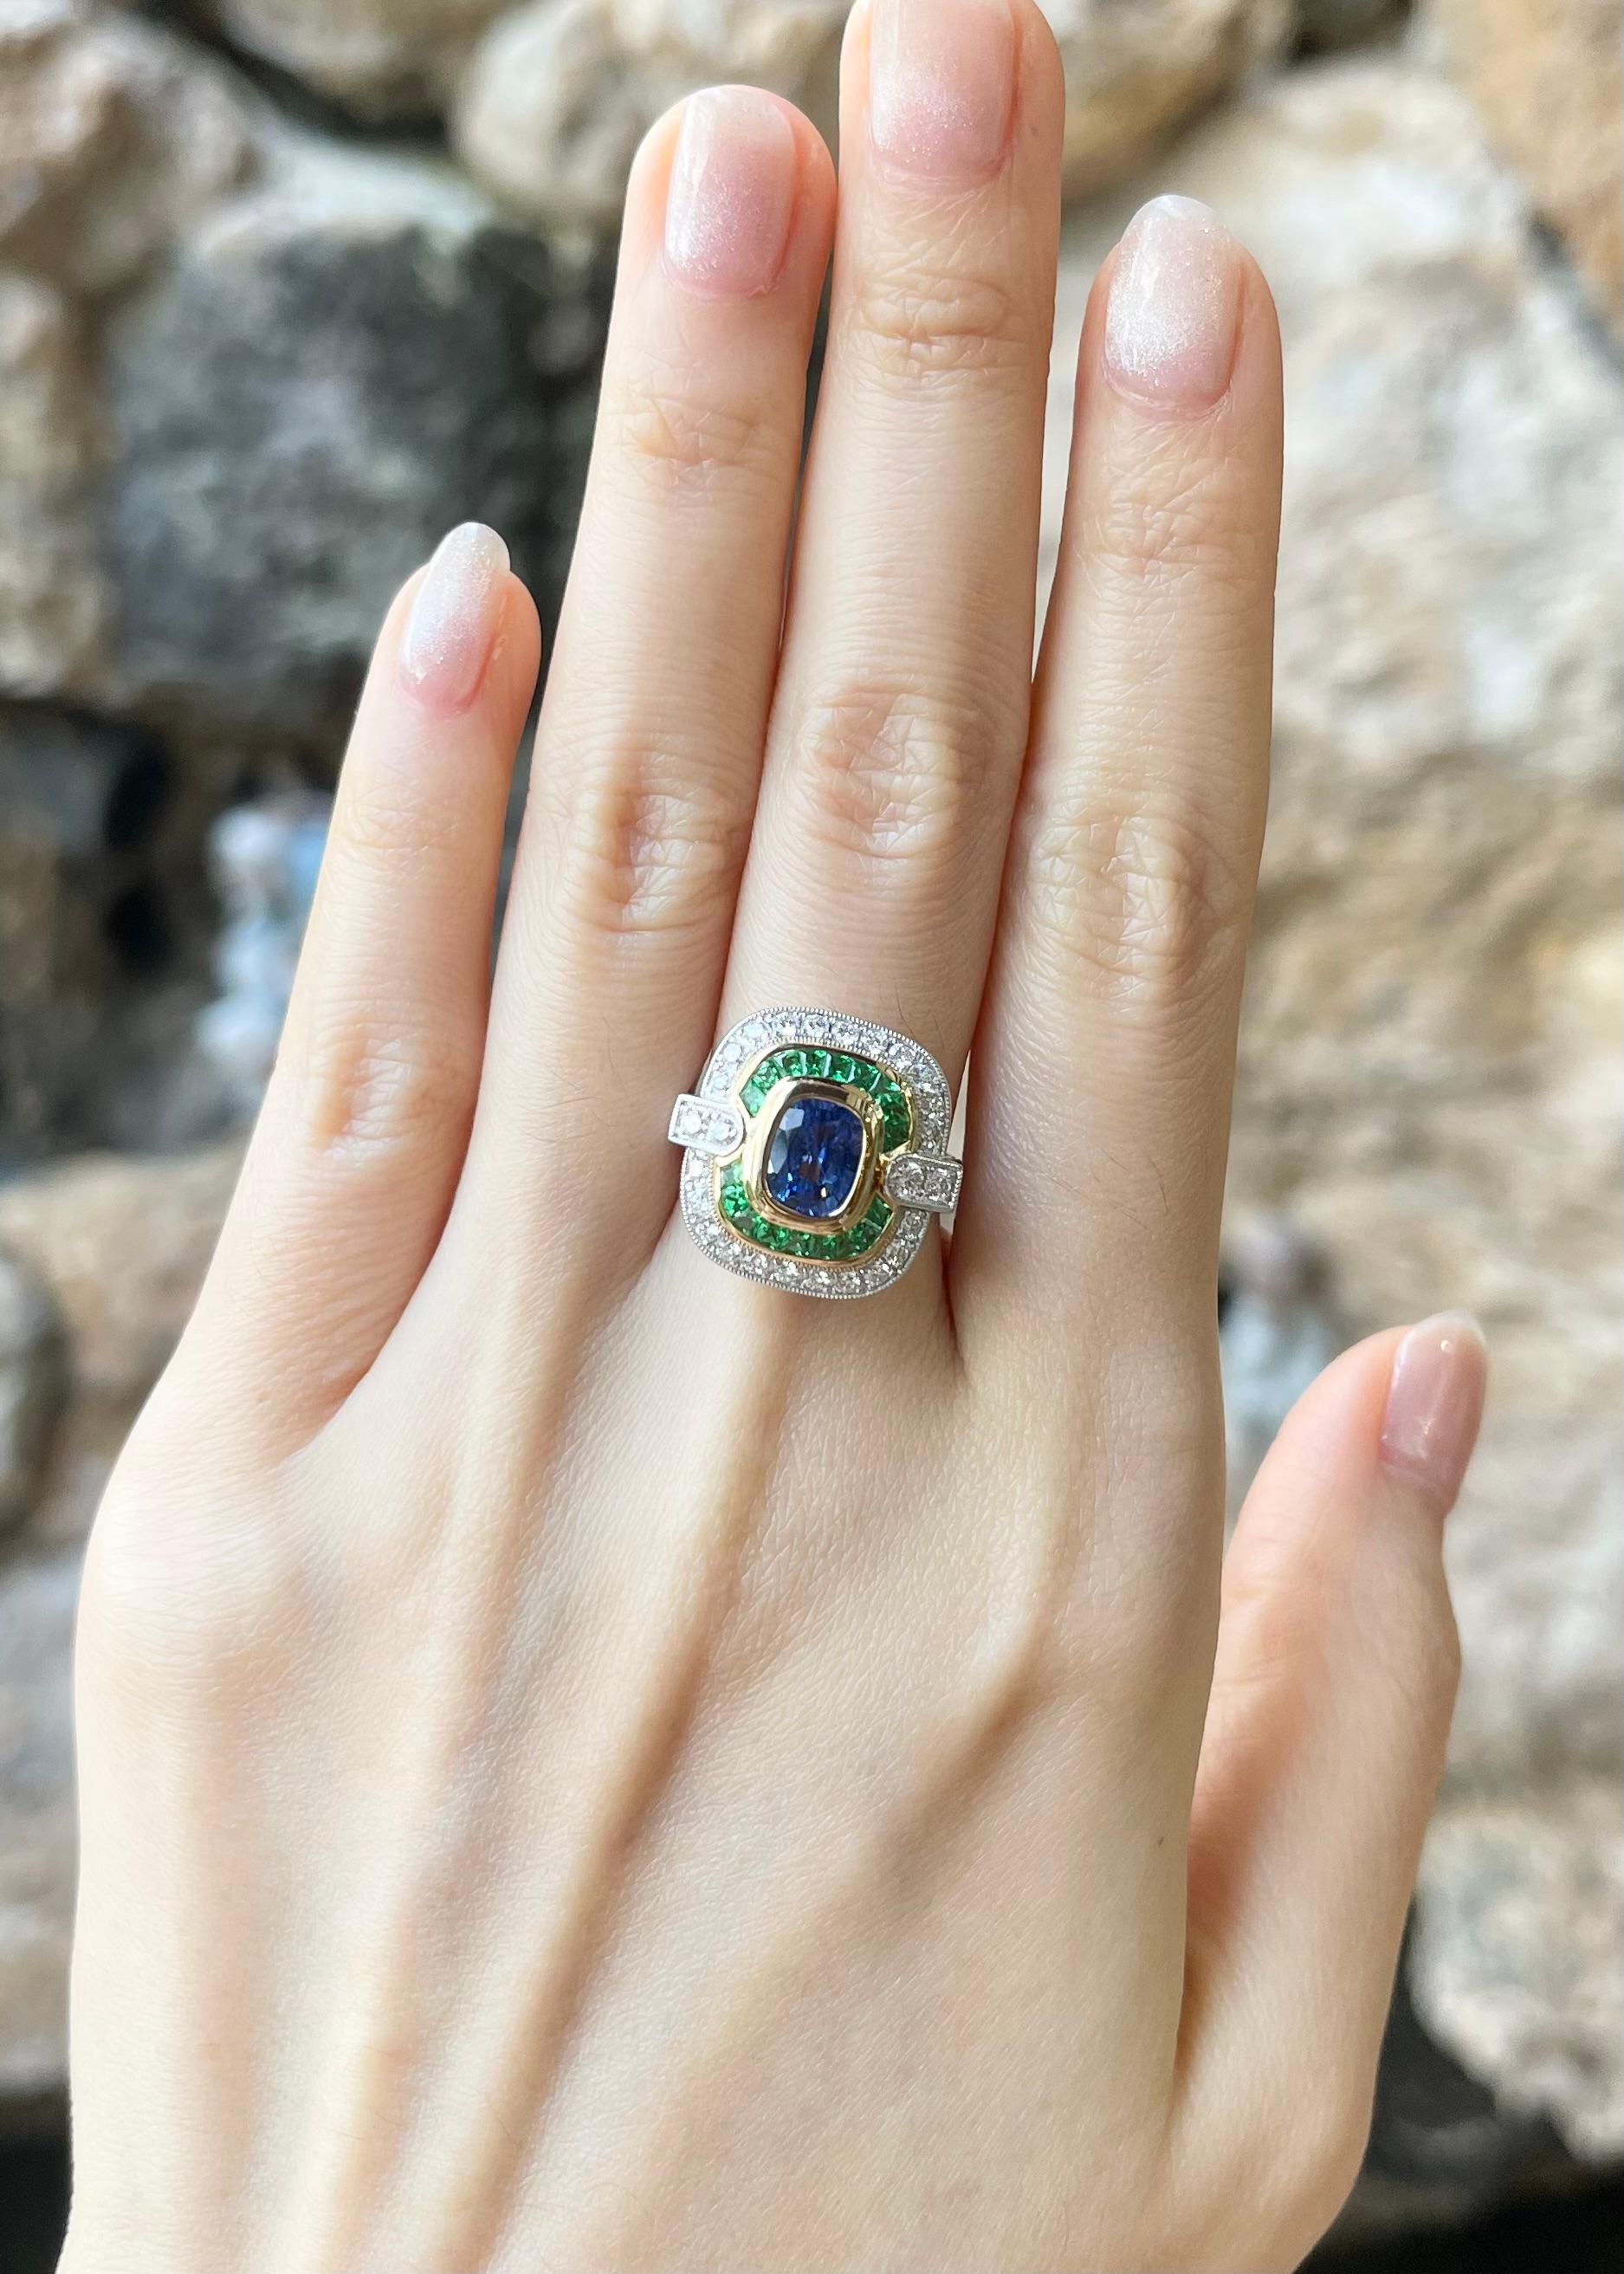 Blue Sapphire 1.43 carats, Tsavorite 0.96 carat and Diamond 0.62 carat Ring set in 18K White Gold Settings

Width:  1.8 cm 
Length: 1.8 cm
Ring Size: 53
Total Weight: 8.68 grams

